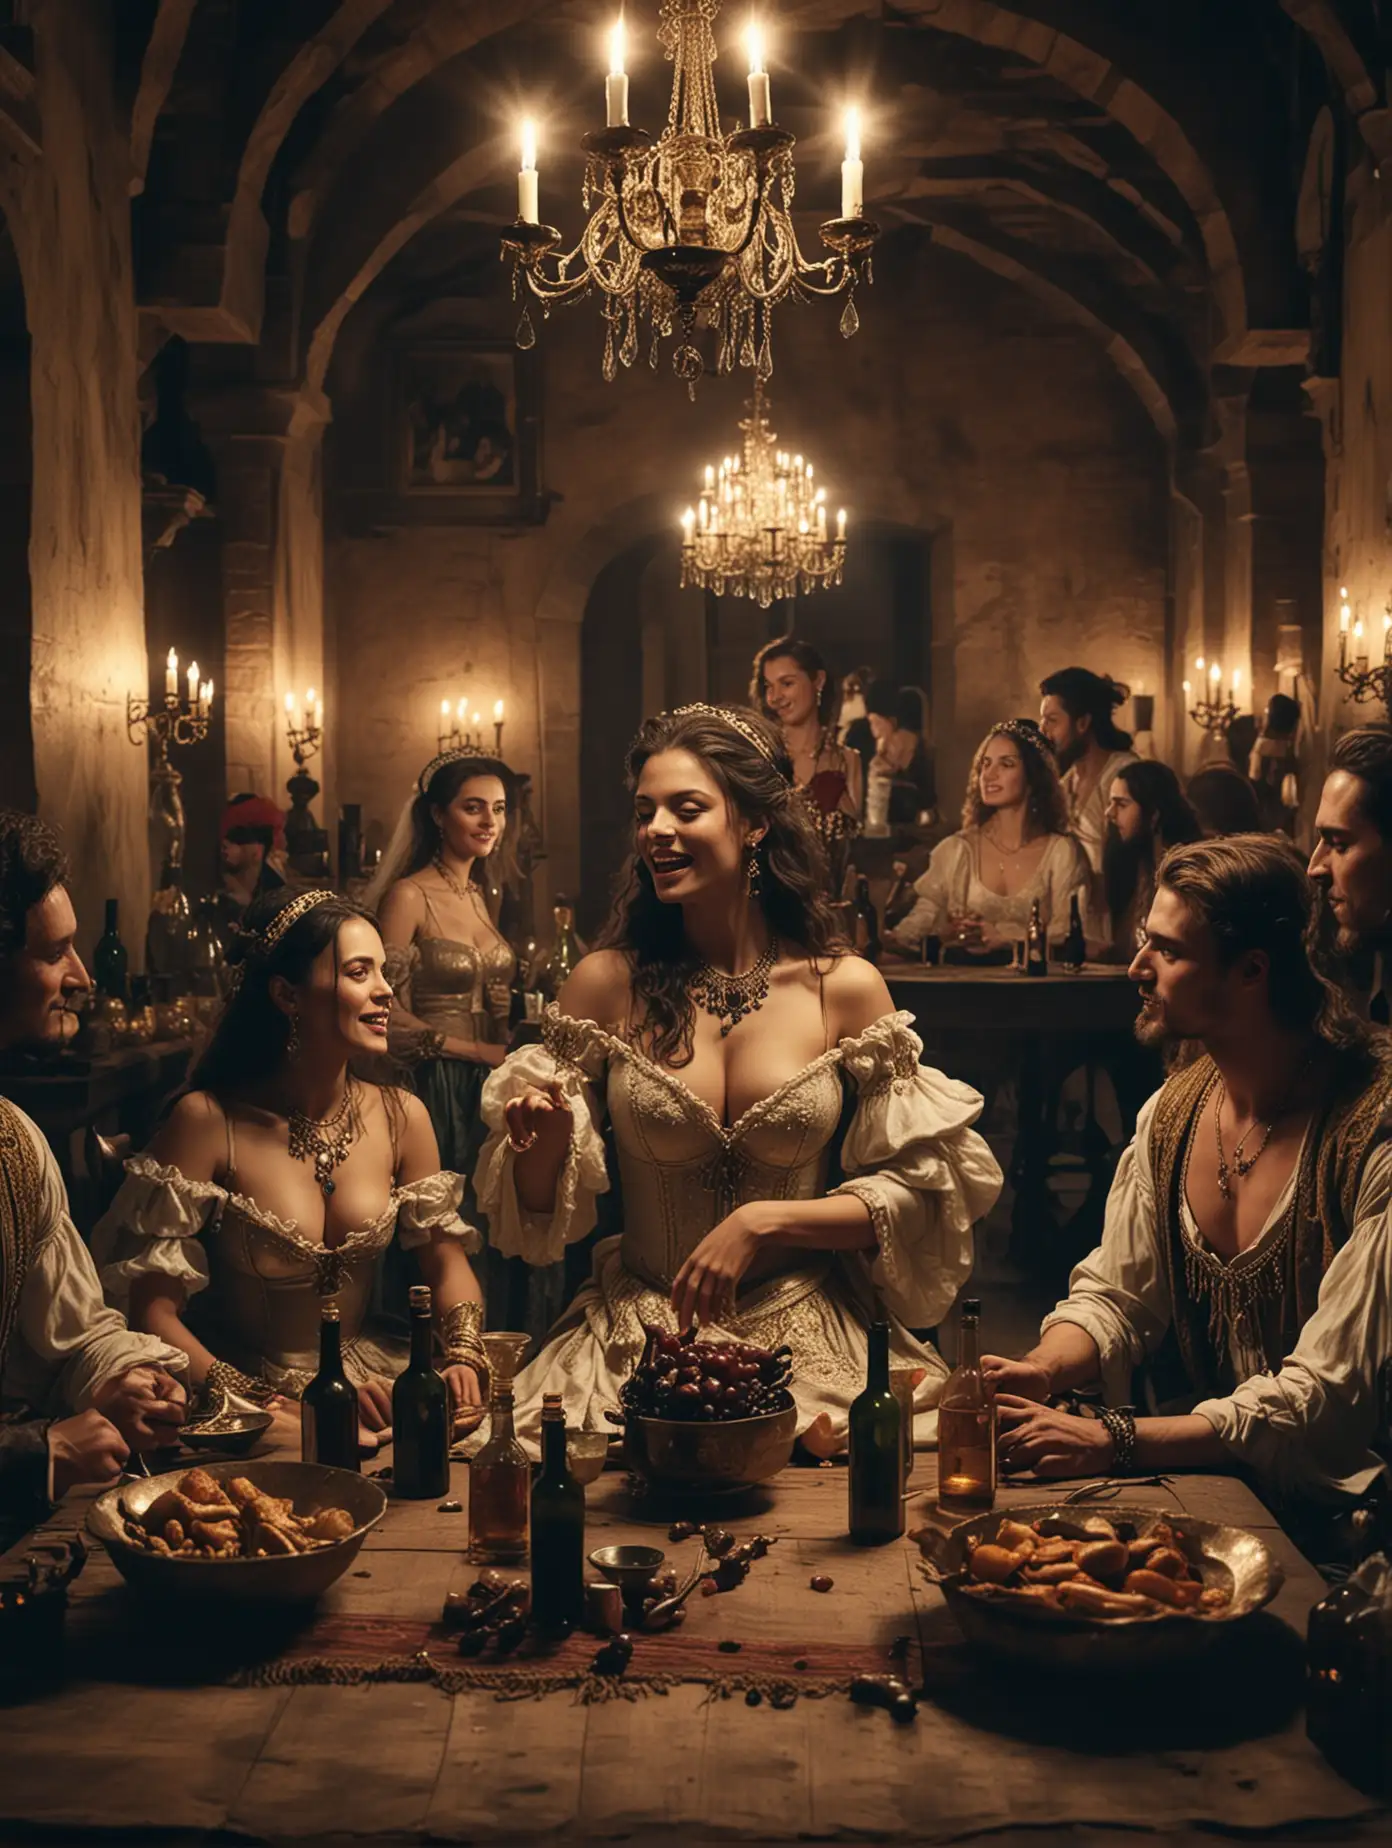 An epic scene in 17th century in a castle hall featuring a group of light dressed men in a good mood in the company of two beautiful belly-dancers are sitting at the table with bottles and dishes, at night, high-detailed, close cinematic rear view from the shoulder of one of the men